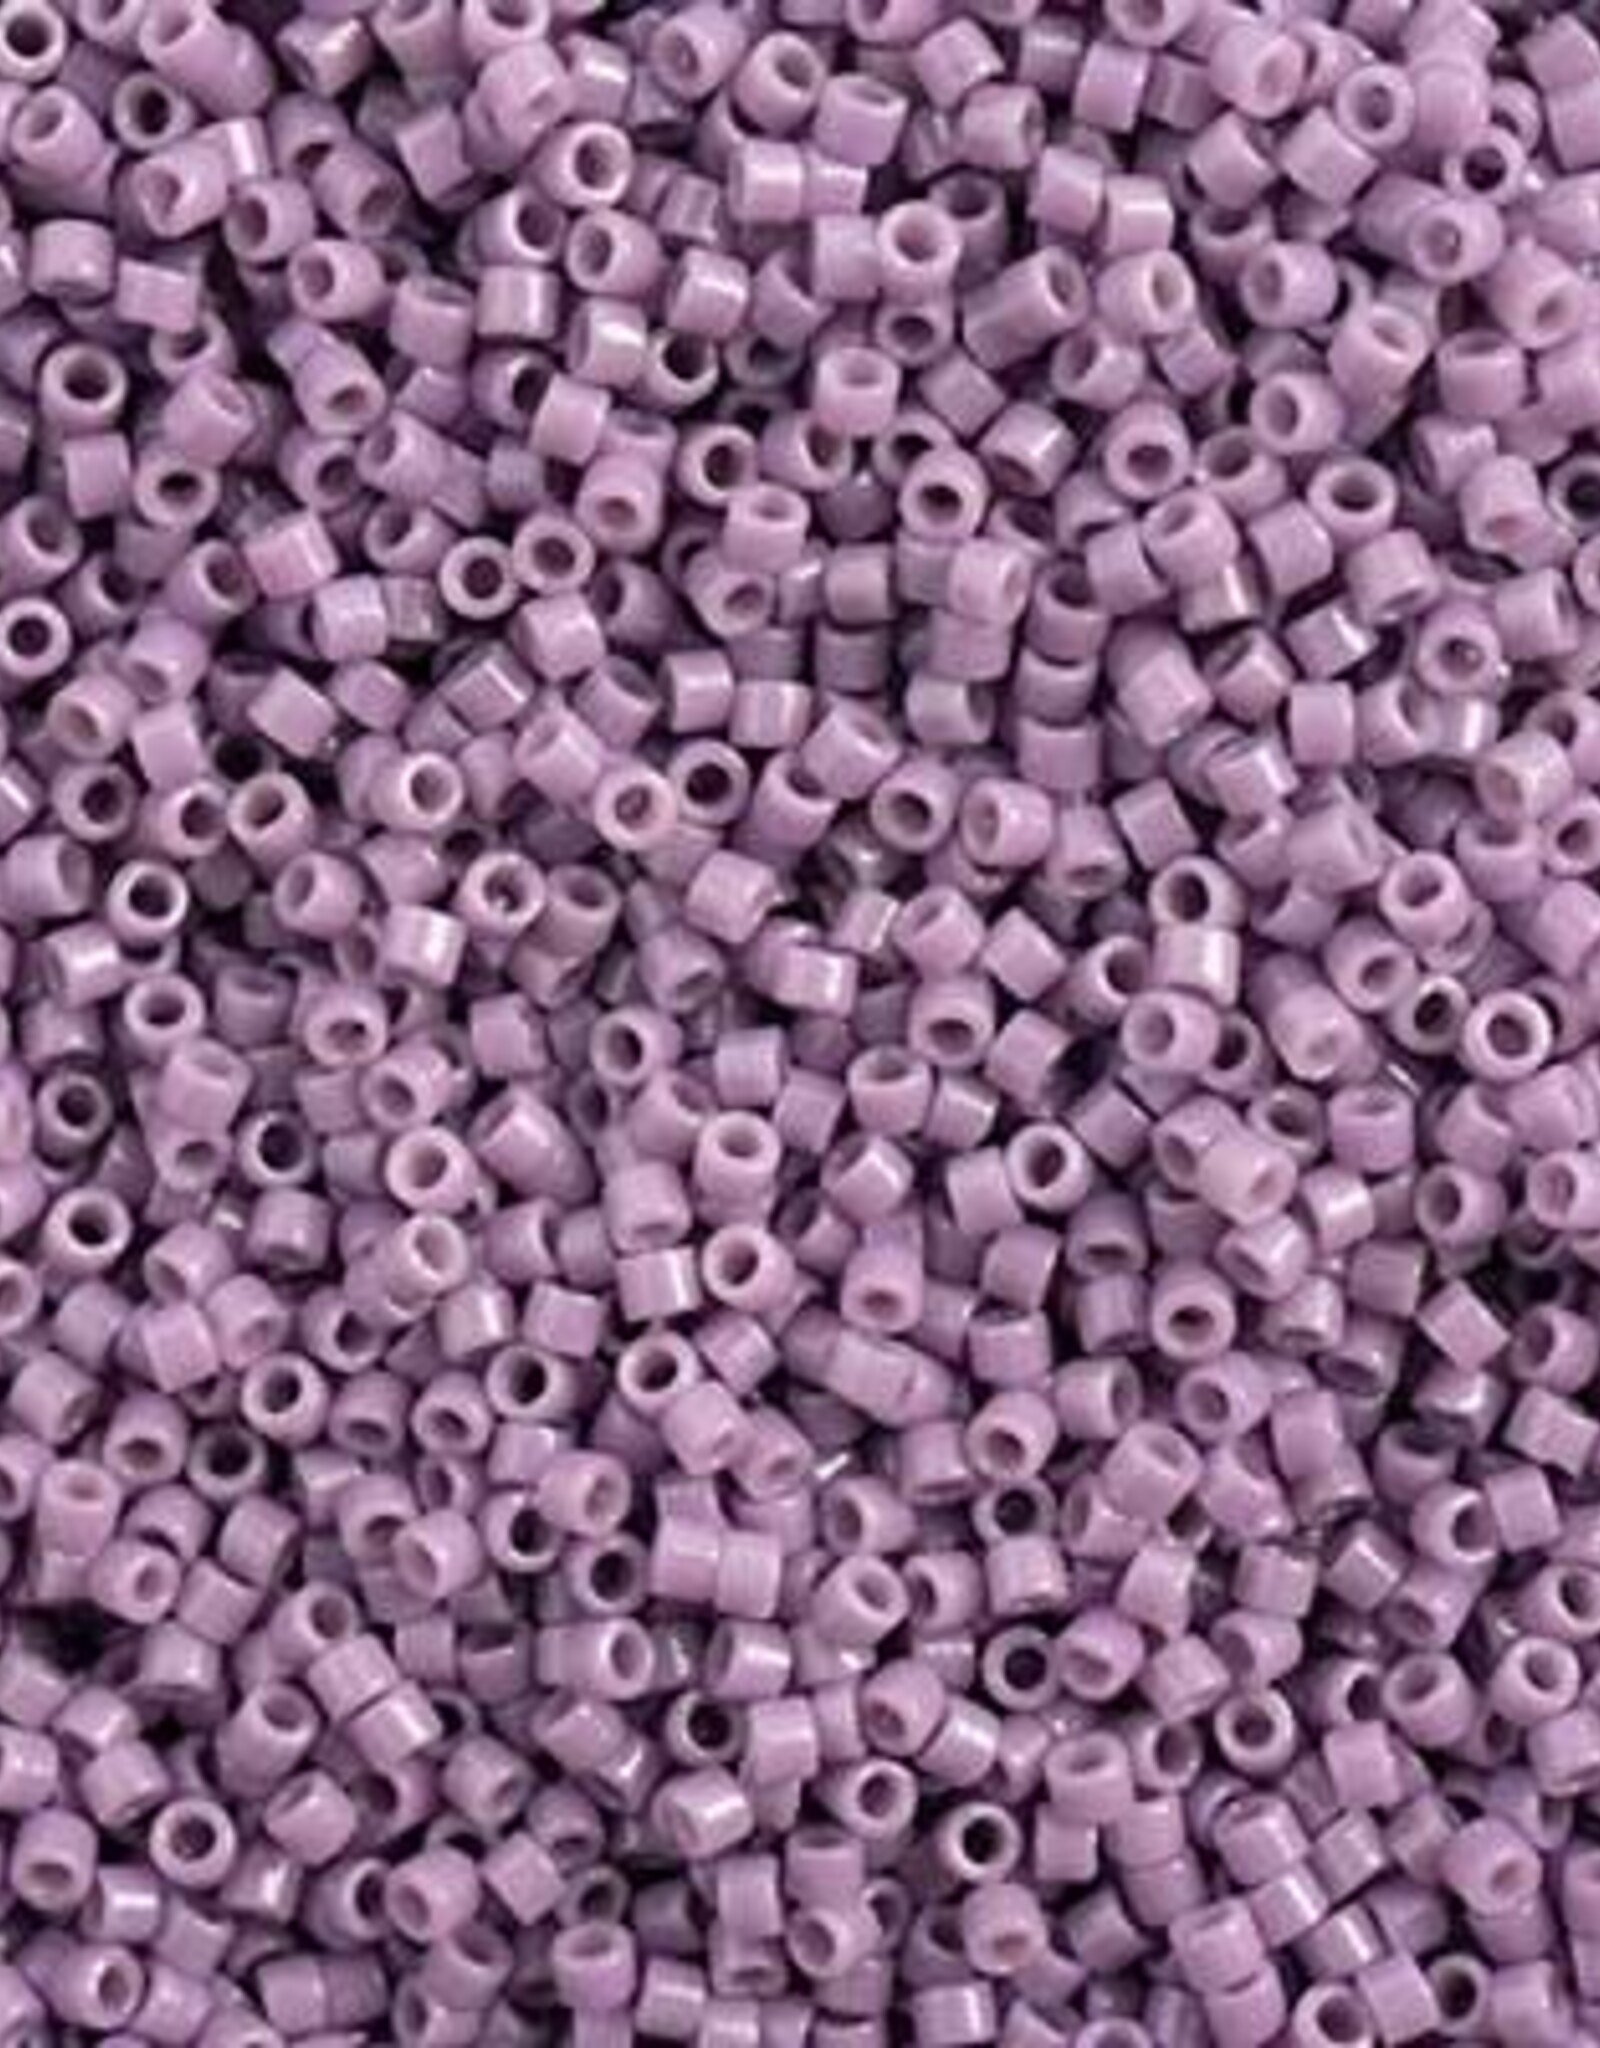 Miyuki Delica Seed Beads Delica 11/0 Duracoat Op. Dyed Dark Purple Orchid 2139V